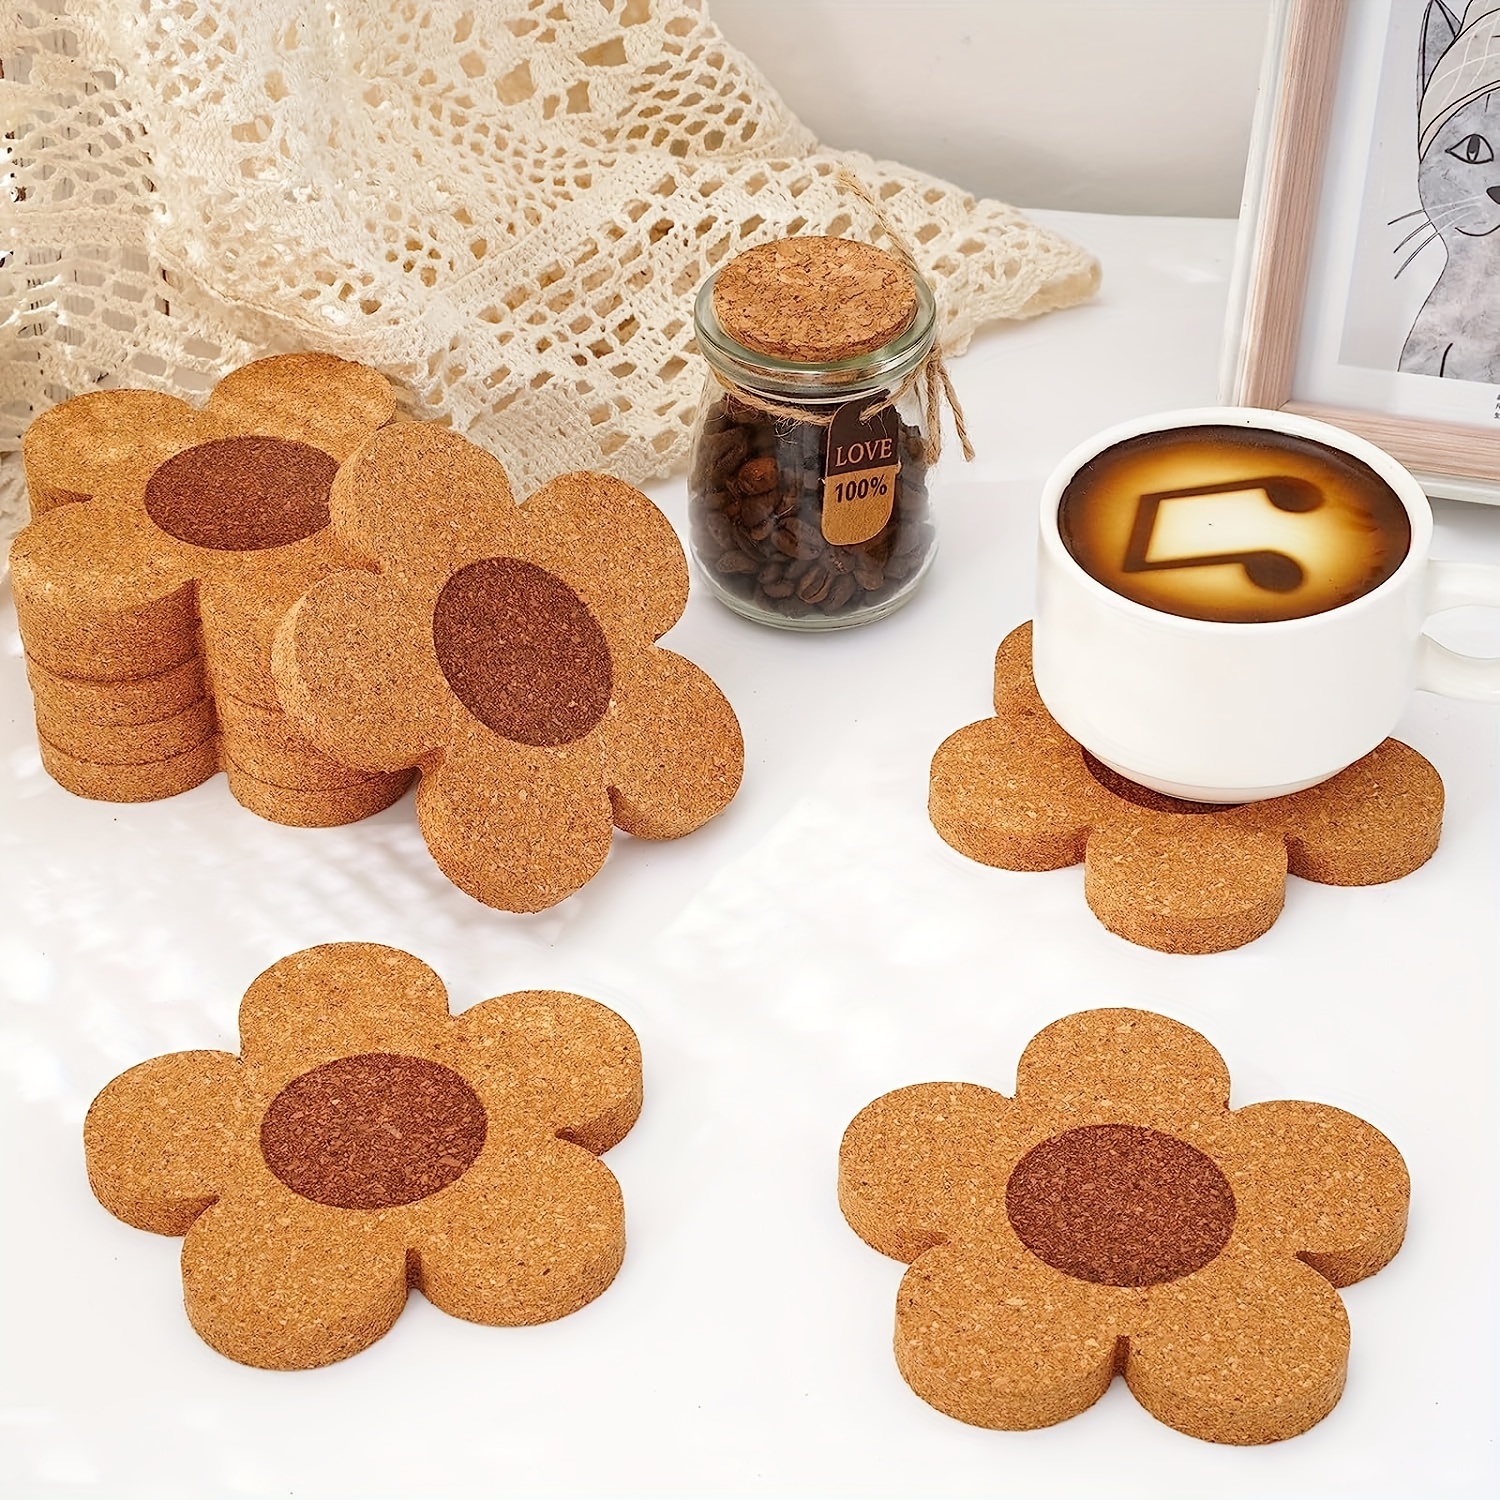 4pcs Flower-Shaped Thick Cork Coasters - Absorbent, Heat-Resistant & Perfect for Drinks, Wine Glasses, Cups & Mugs